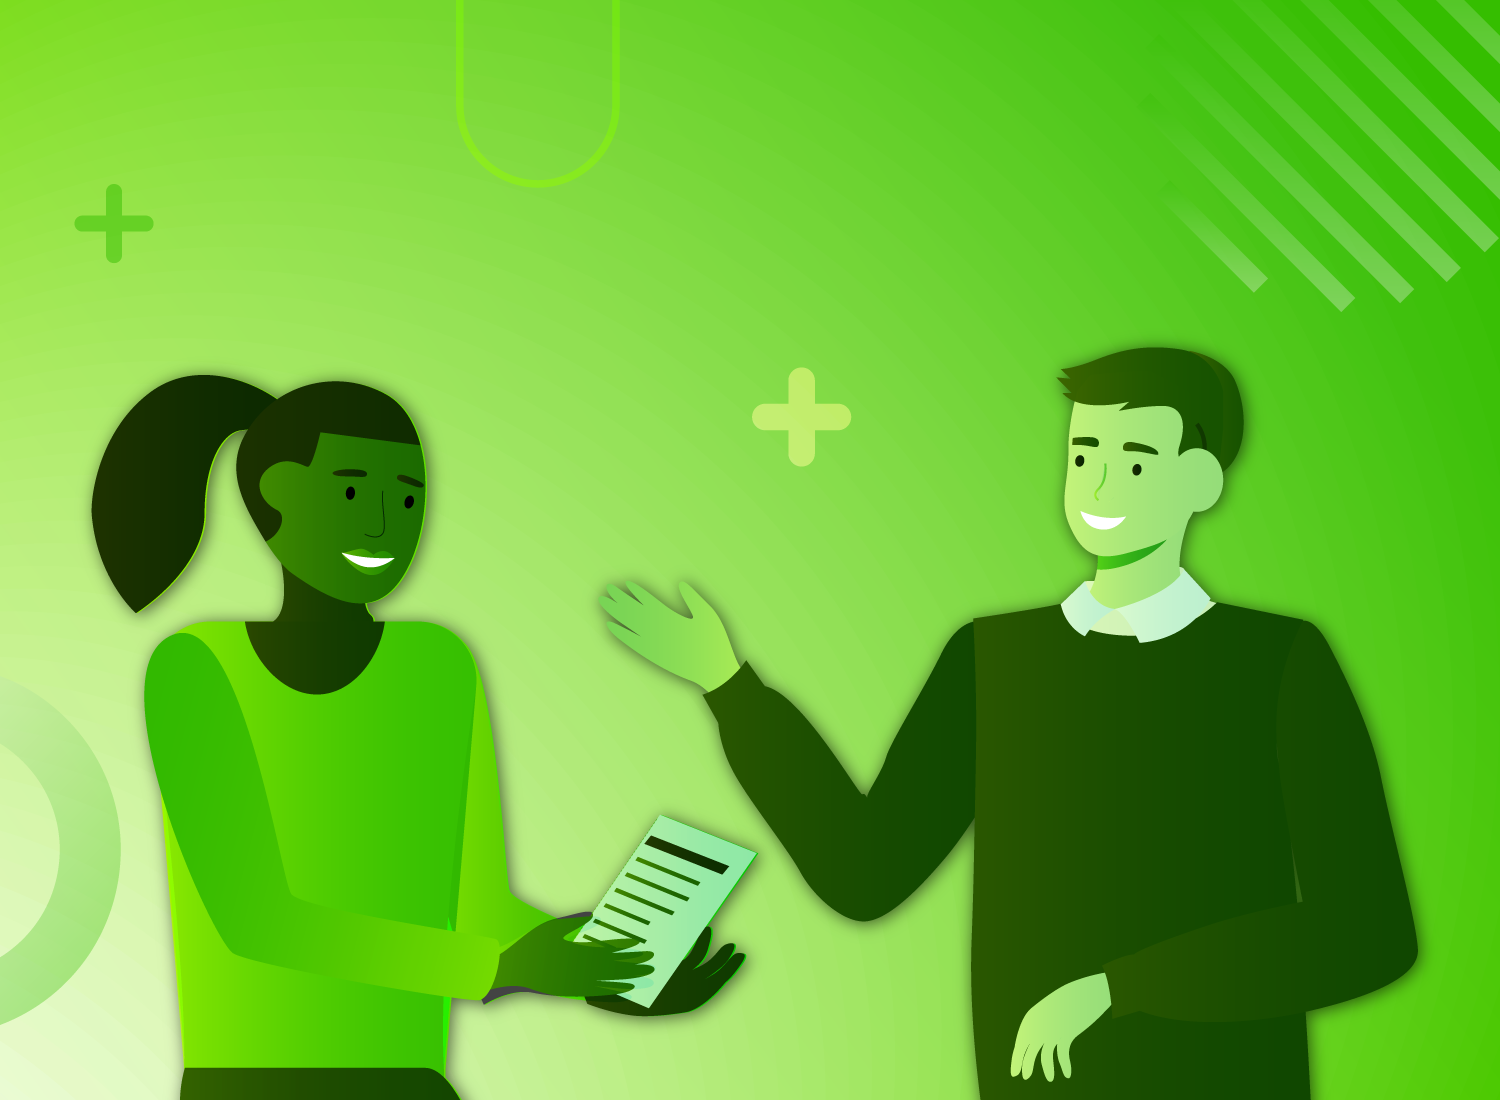 This image is a stylized illustration featuring two characters engaged in a professional interview. The background is a gradient of light to medium green, with abstract geometric shapes and plus signs, which may symbolize a positive and dynamic exchange of ideas. Both characters are smiling and appear to be communicating effectively, embodying the concept of teamwork between subject matter experts and colleagues.